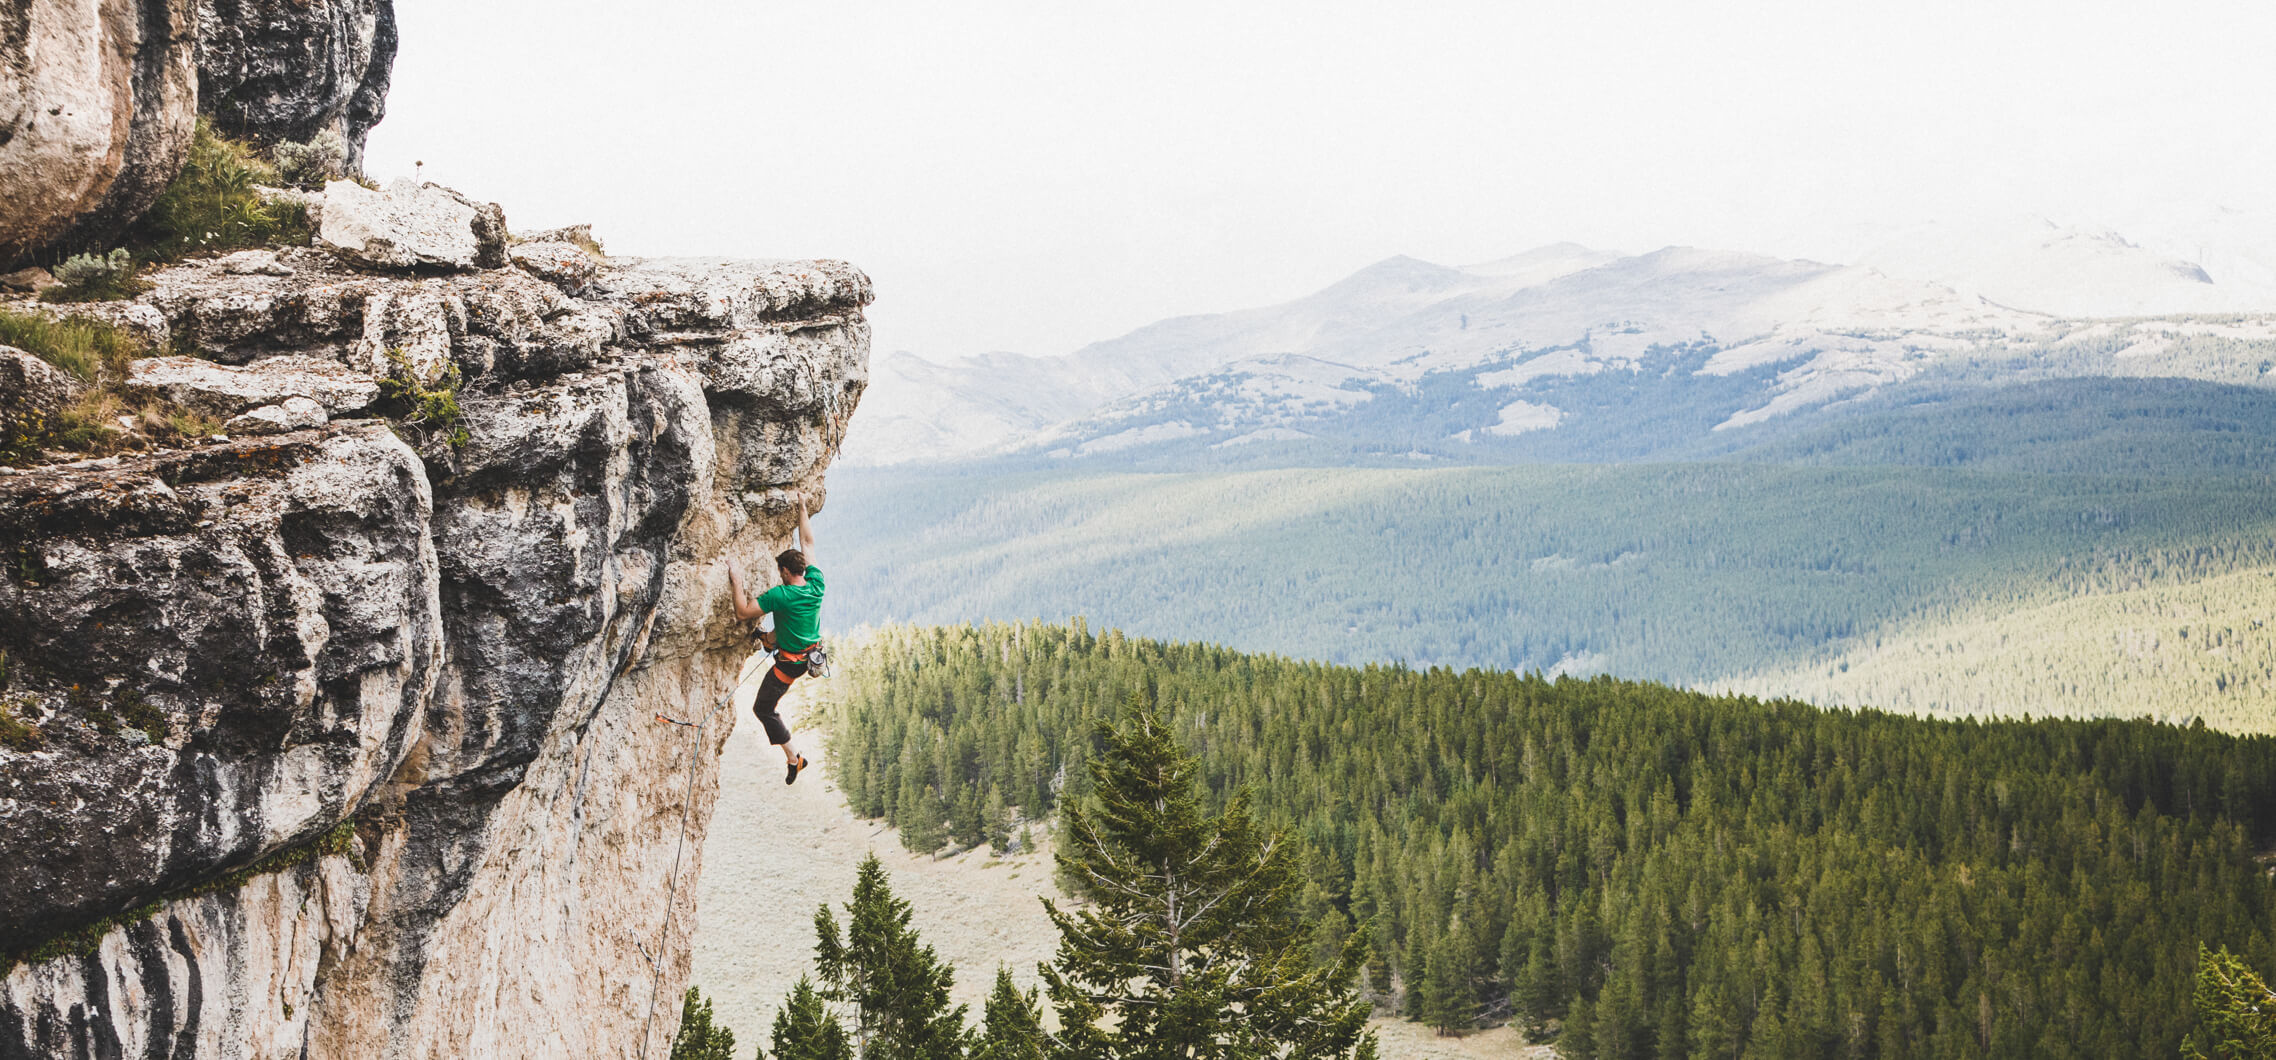 Our 8 Favorite Summer Climbing Crags